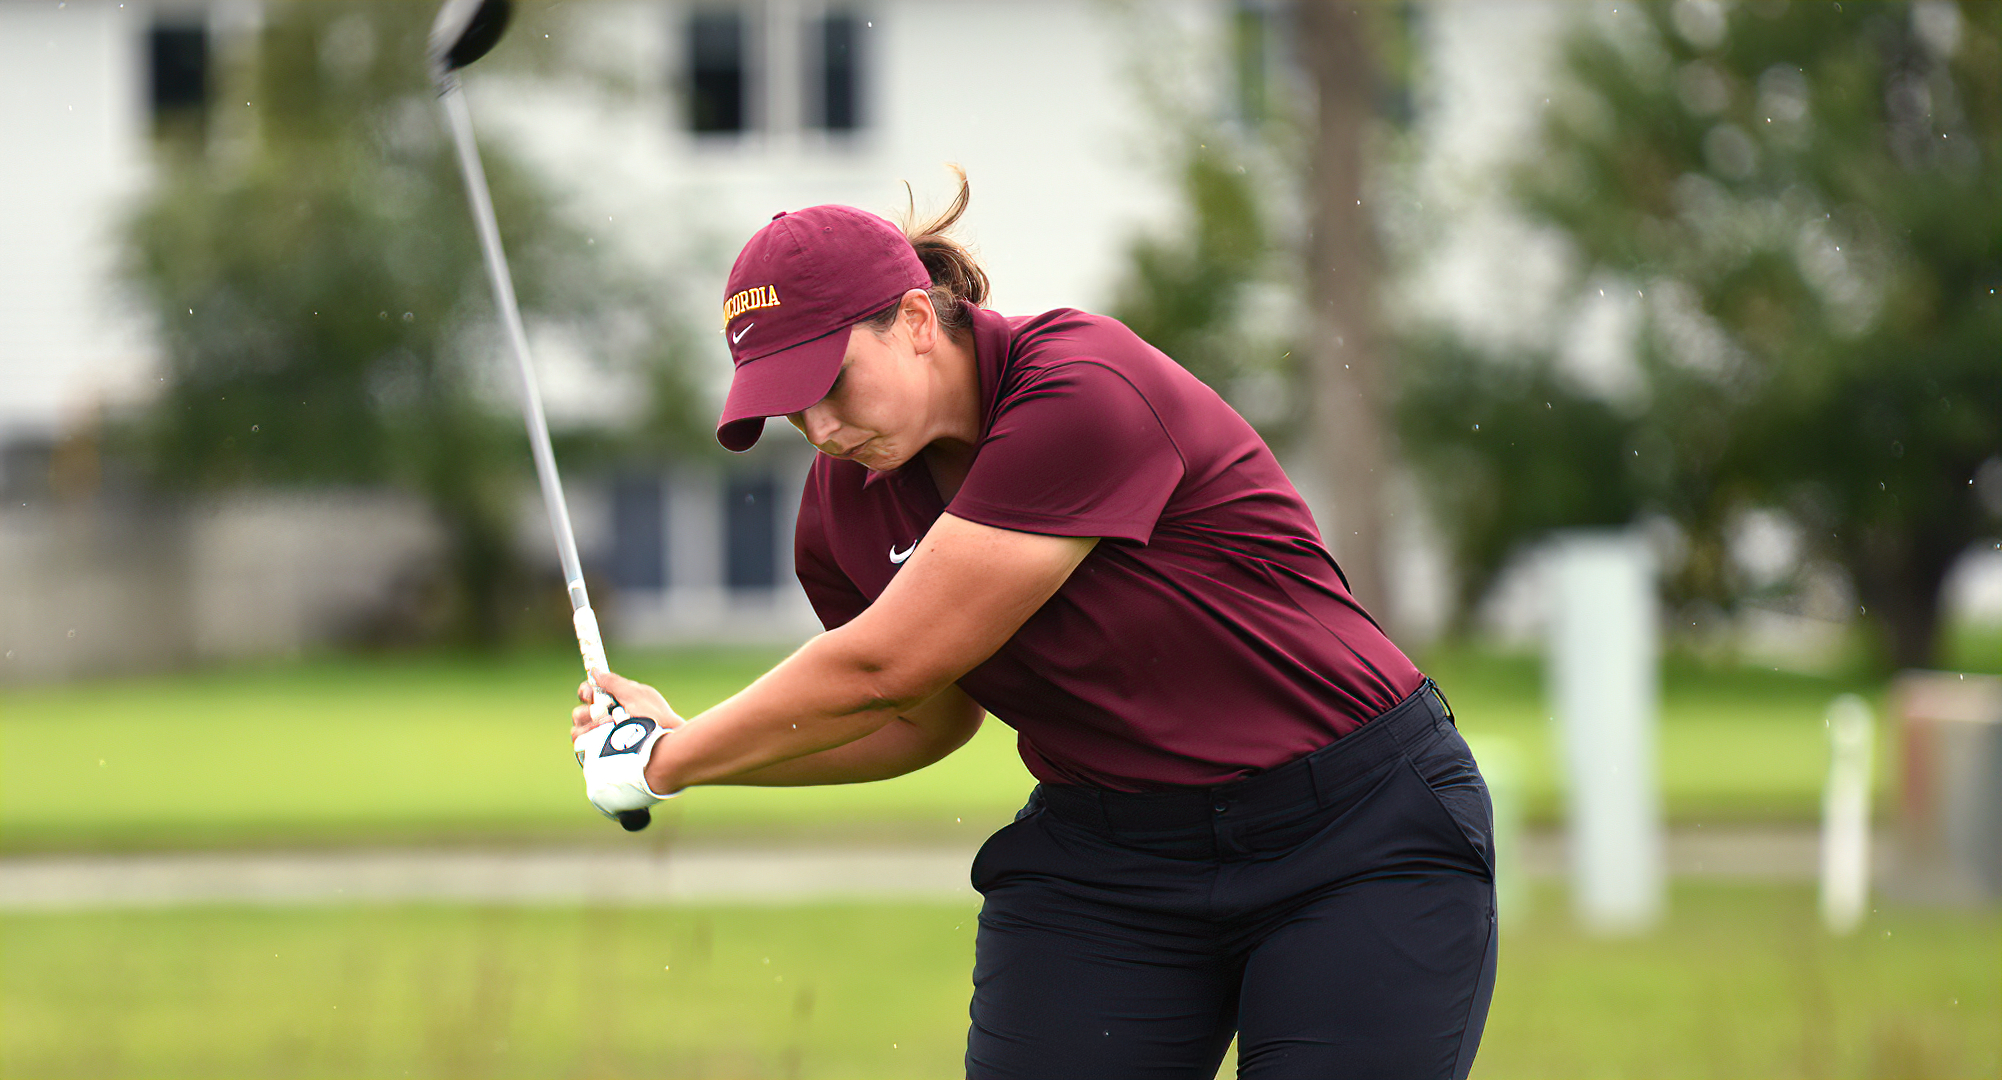 Senior Bailey Klause led the Cobbers at the Carleton-St. Olaf Spring Invite. She shot a 2-day total of 175 and was just outside the Top 25.